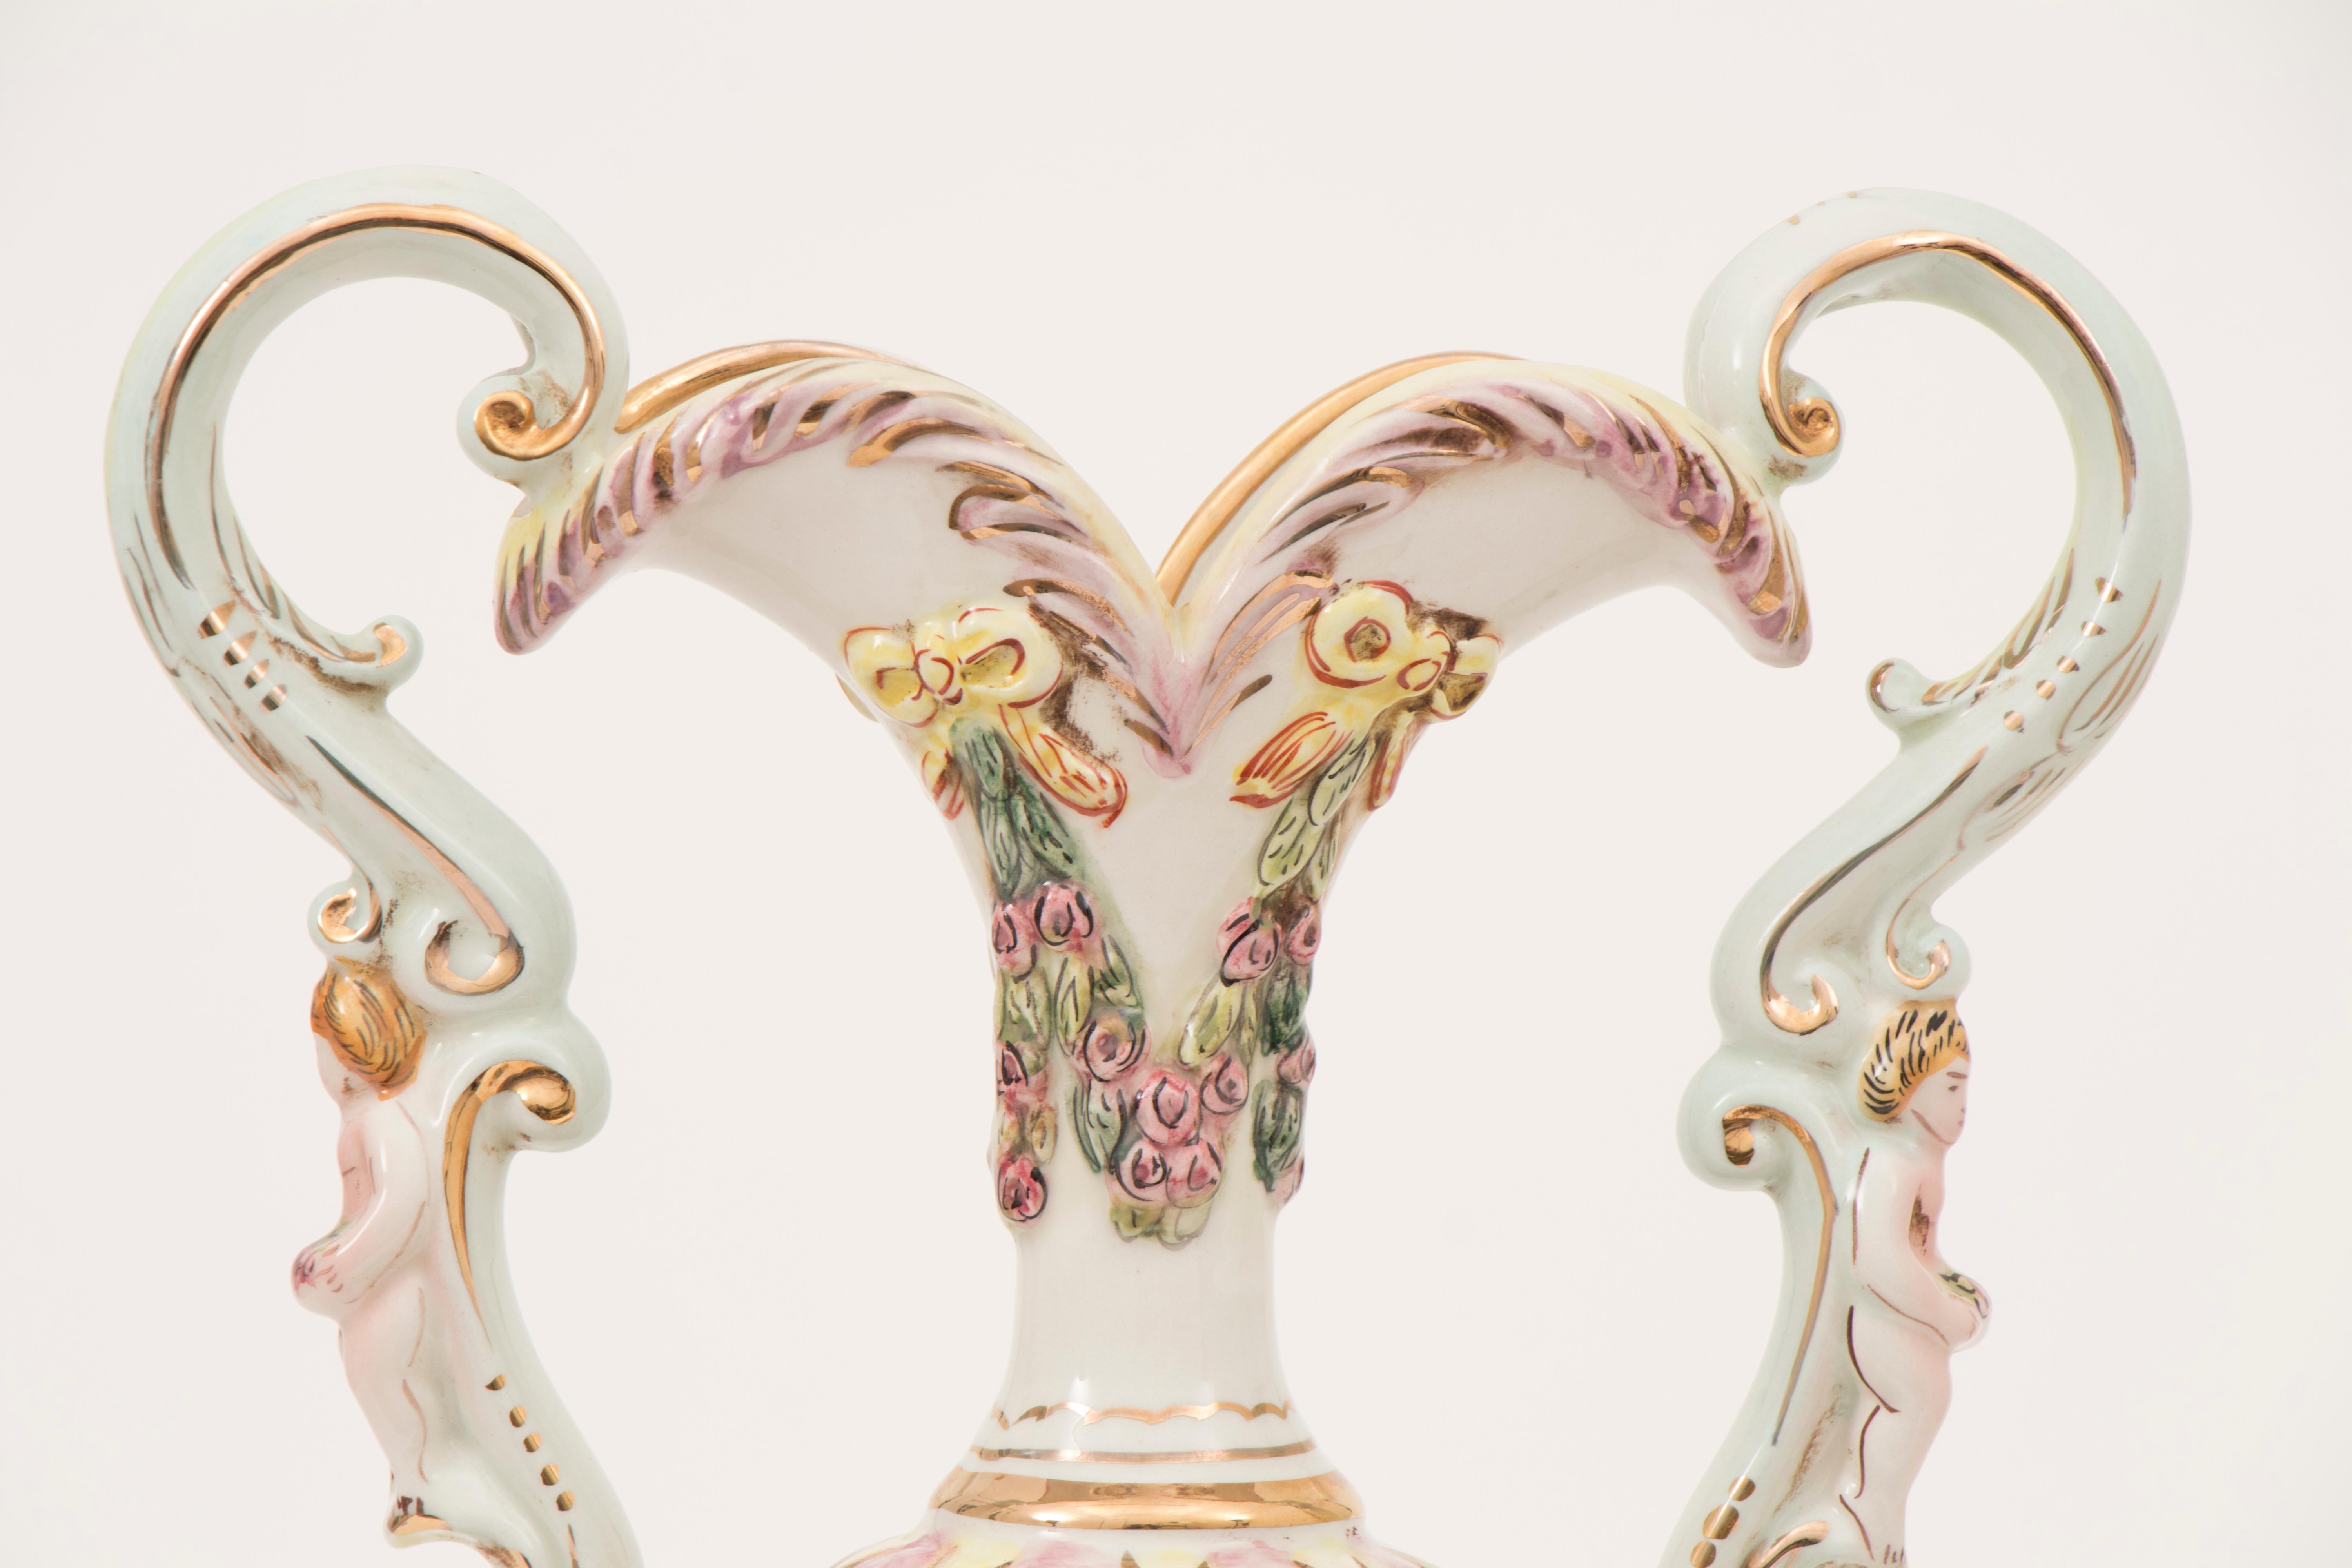 A vintage 1950s large Italian Capodimonte porcelain two-handled urn with a cherub on each ornate handle. The urn features a colourful mythological garden scene with cherubs, men and women, children and garden furniture. A feature Greek Satyr head is